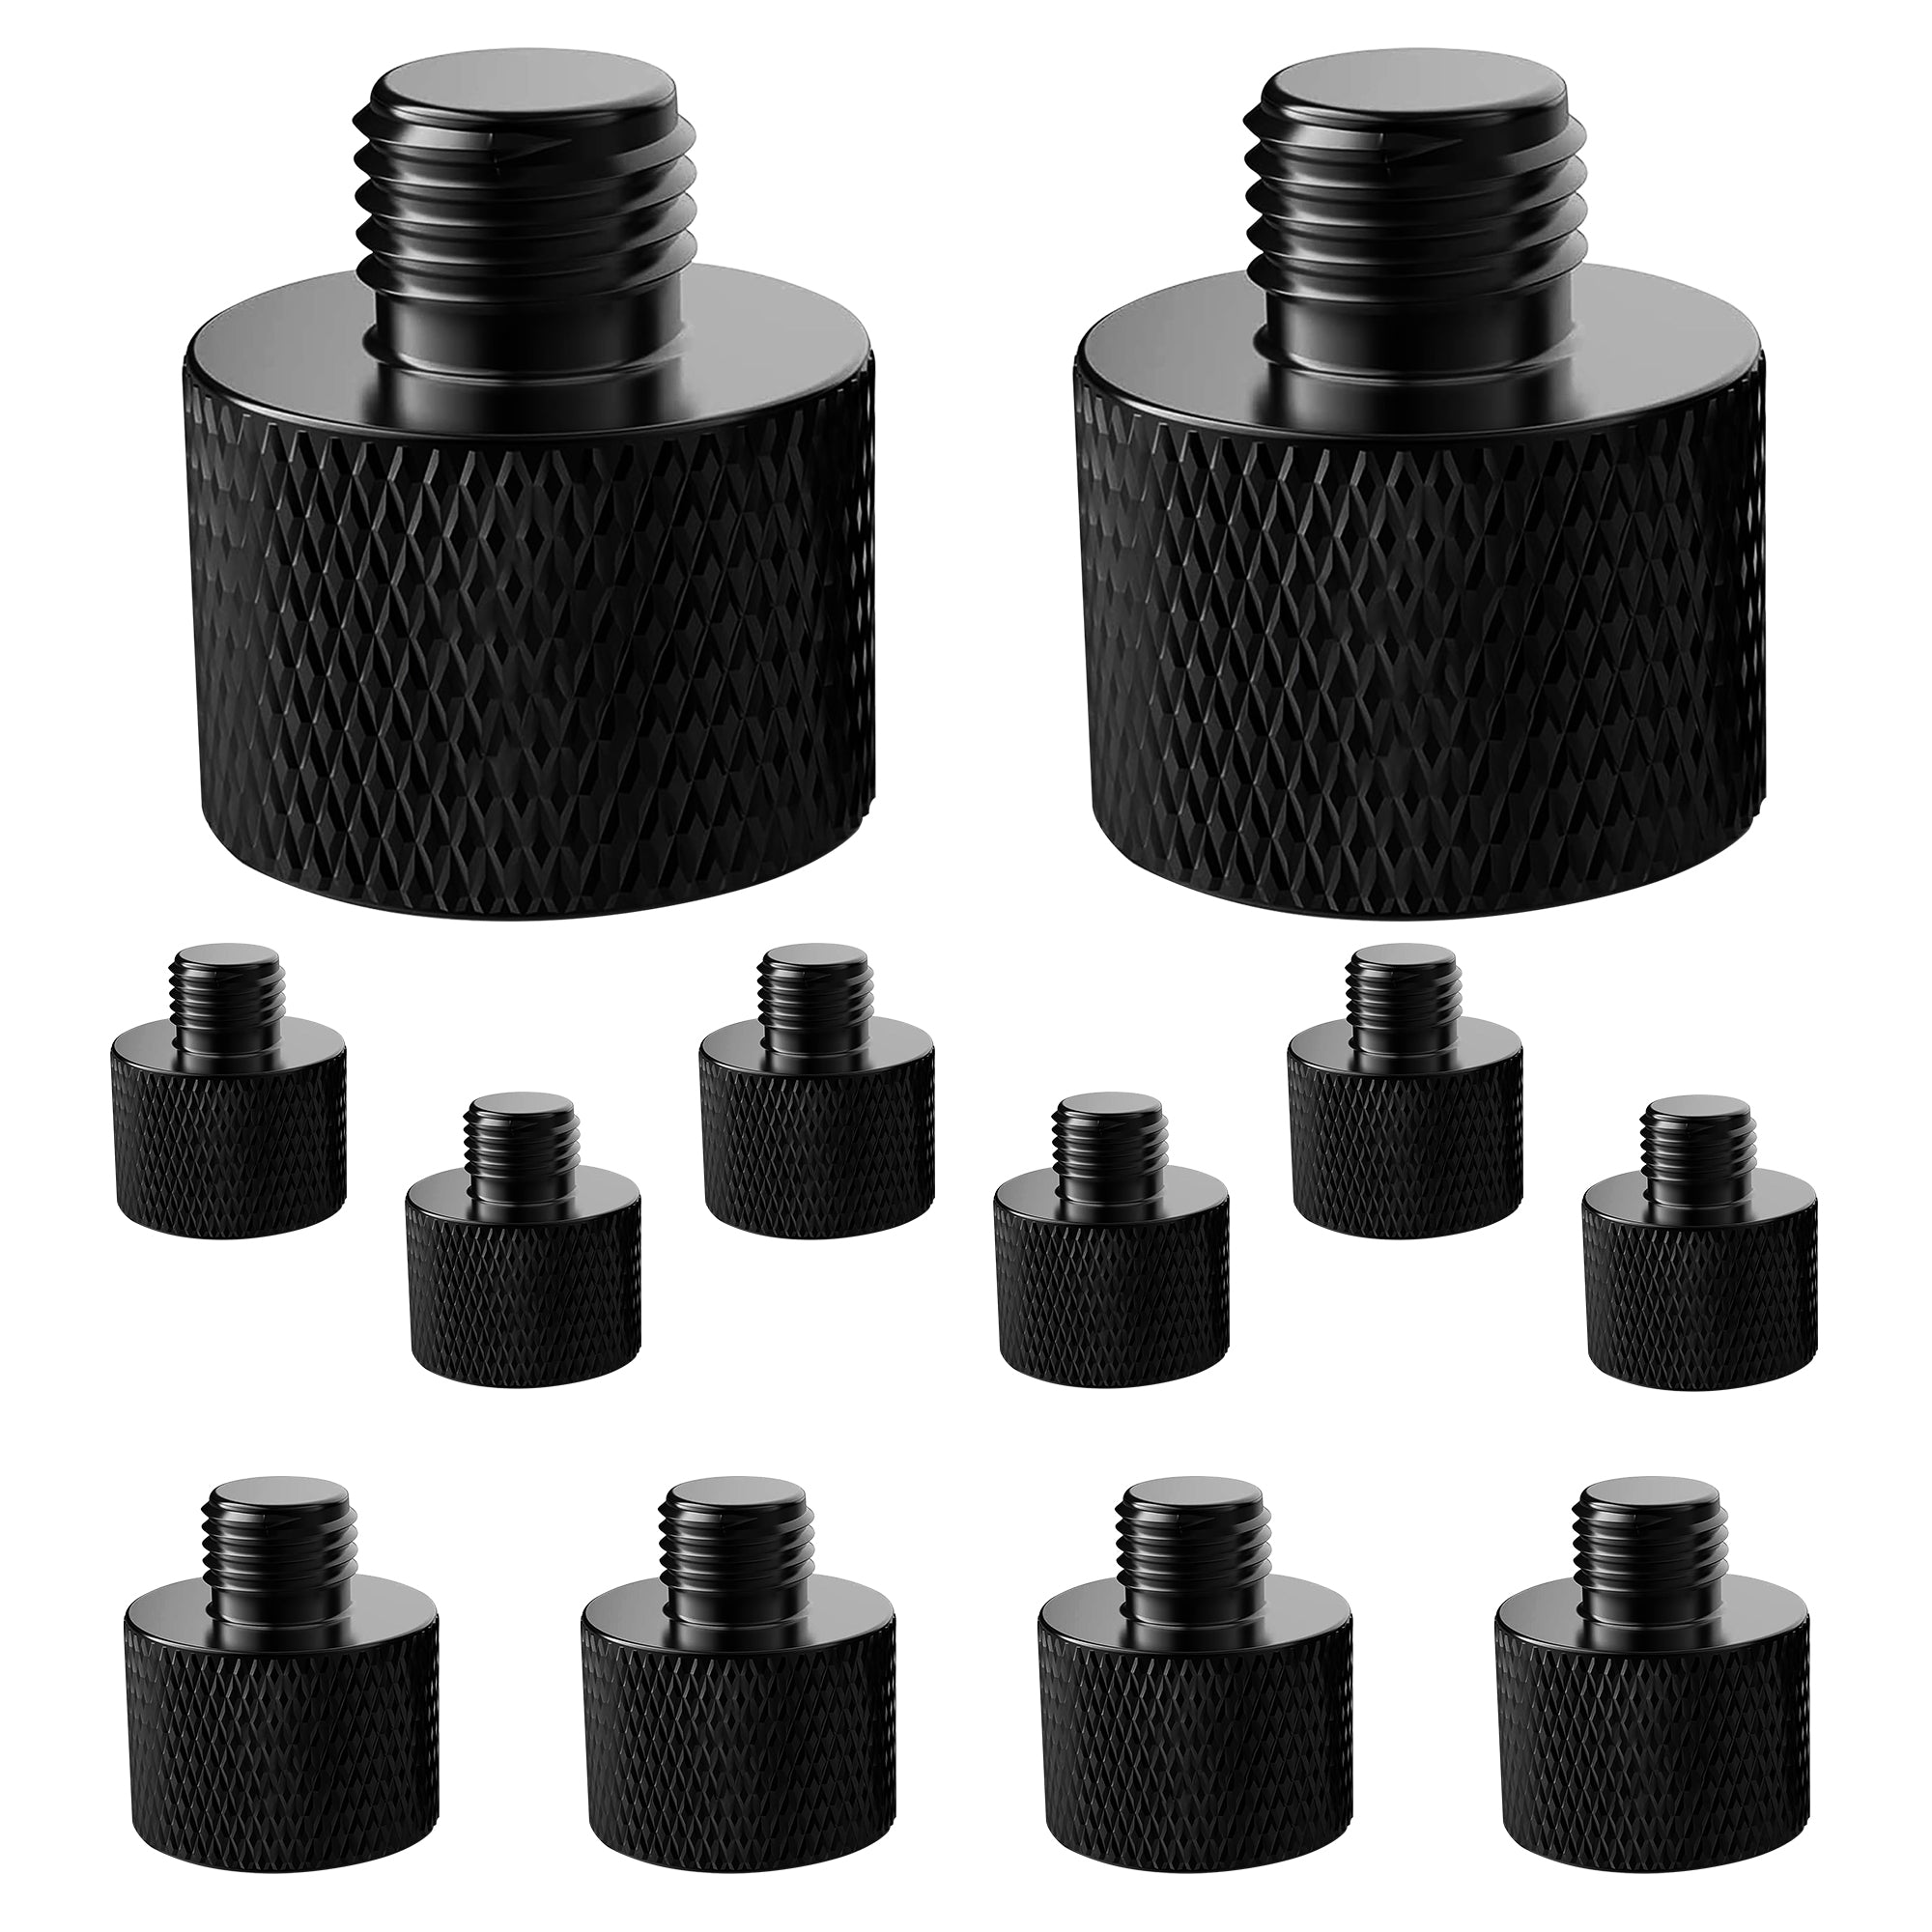 5Core Mic Stand Adapter 5/8 Female to 3/8 Male Screw Adapters For Microphone Stands & Clips 12Pcs